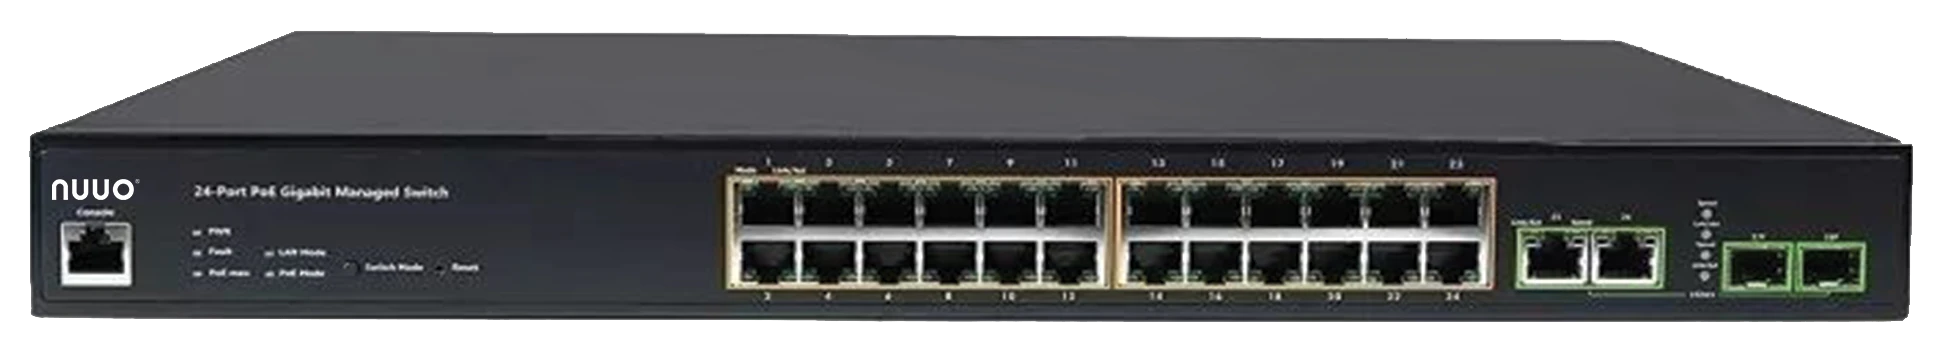 2073-n24poe-switch-product-image-front-17013750231846.png